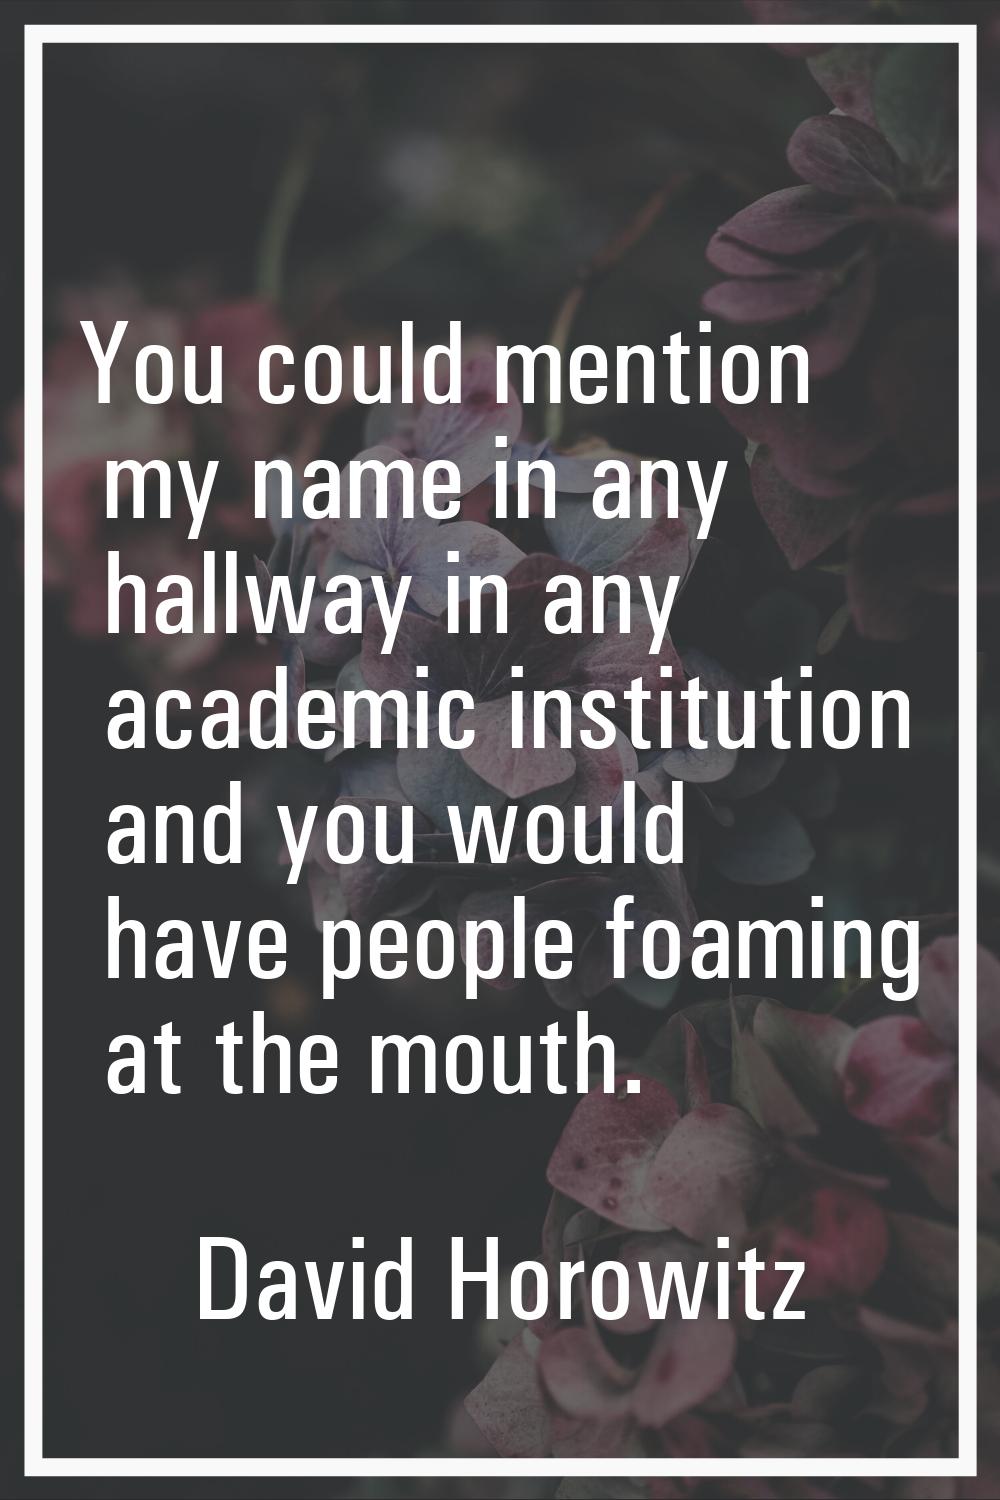 You could mention my name in any hallway in any academic institution and you would have people foam